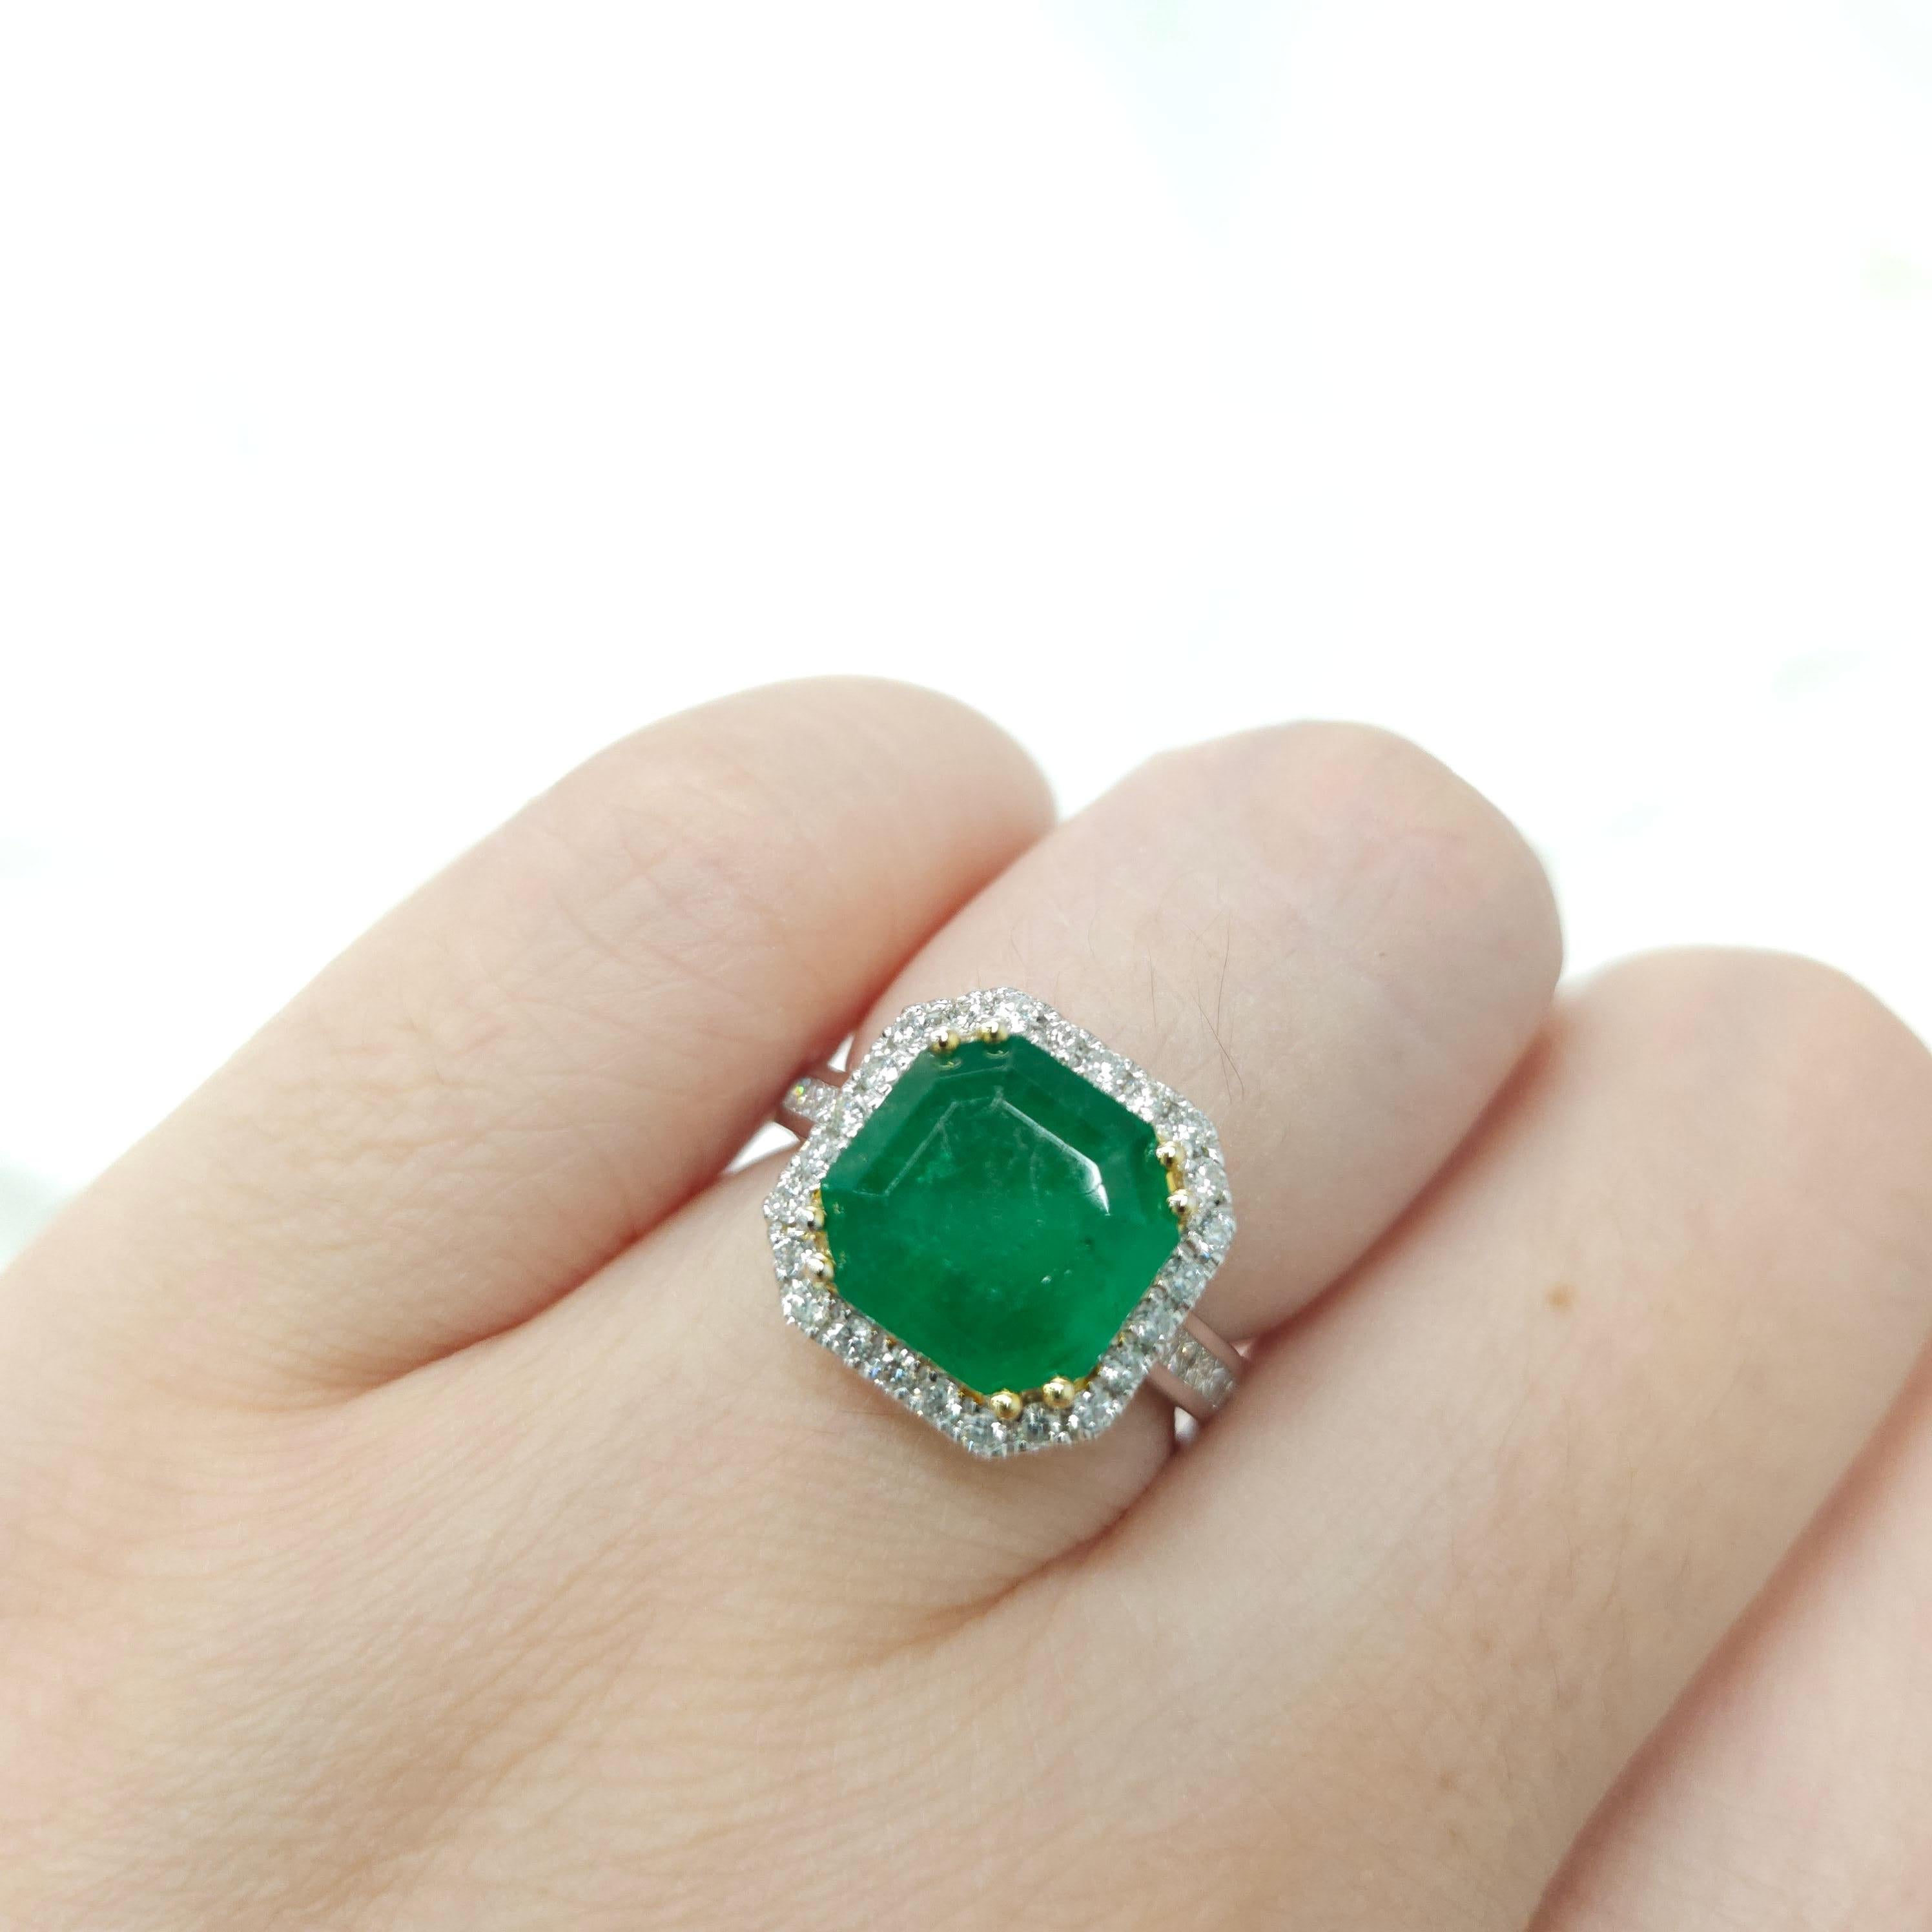 Introducing the breathtaking IGI certified 18K white gold 3.33 Carat Emerald & 0.56ct diamond ring, a truly exquisite piece of jewelry that flawlessly showcases the beauty of an emerald cut in a perfect, purely green color. This stunning ring is a